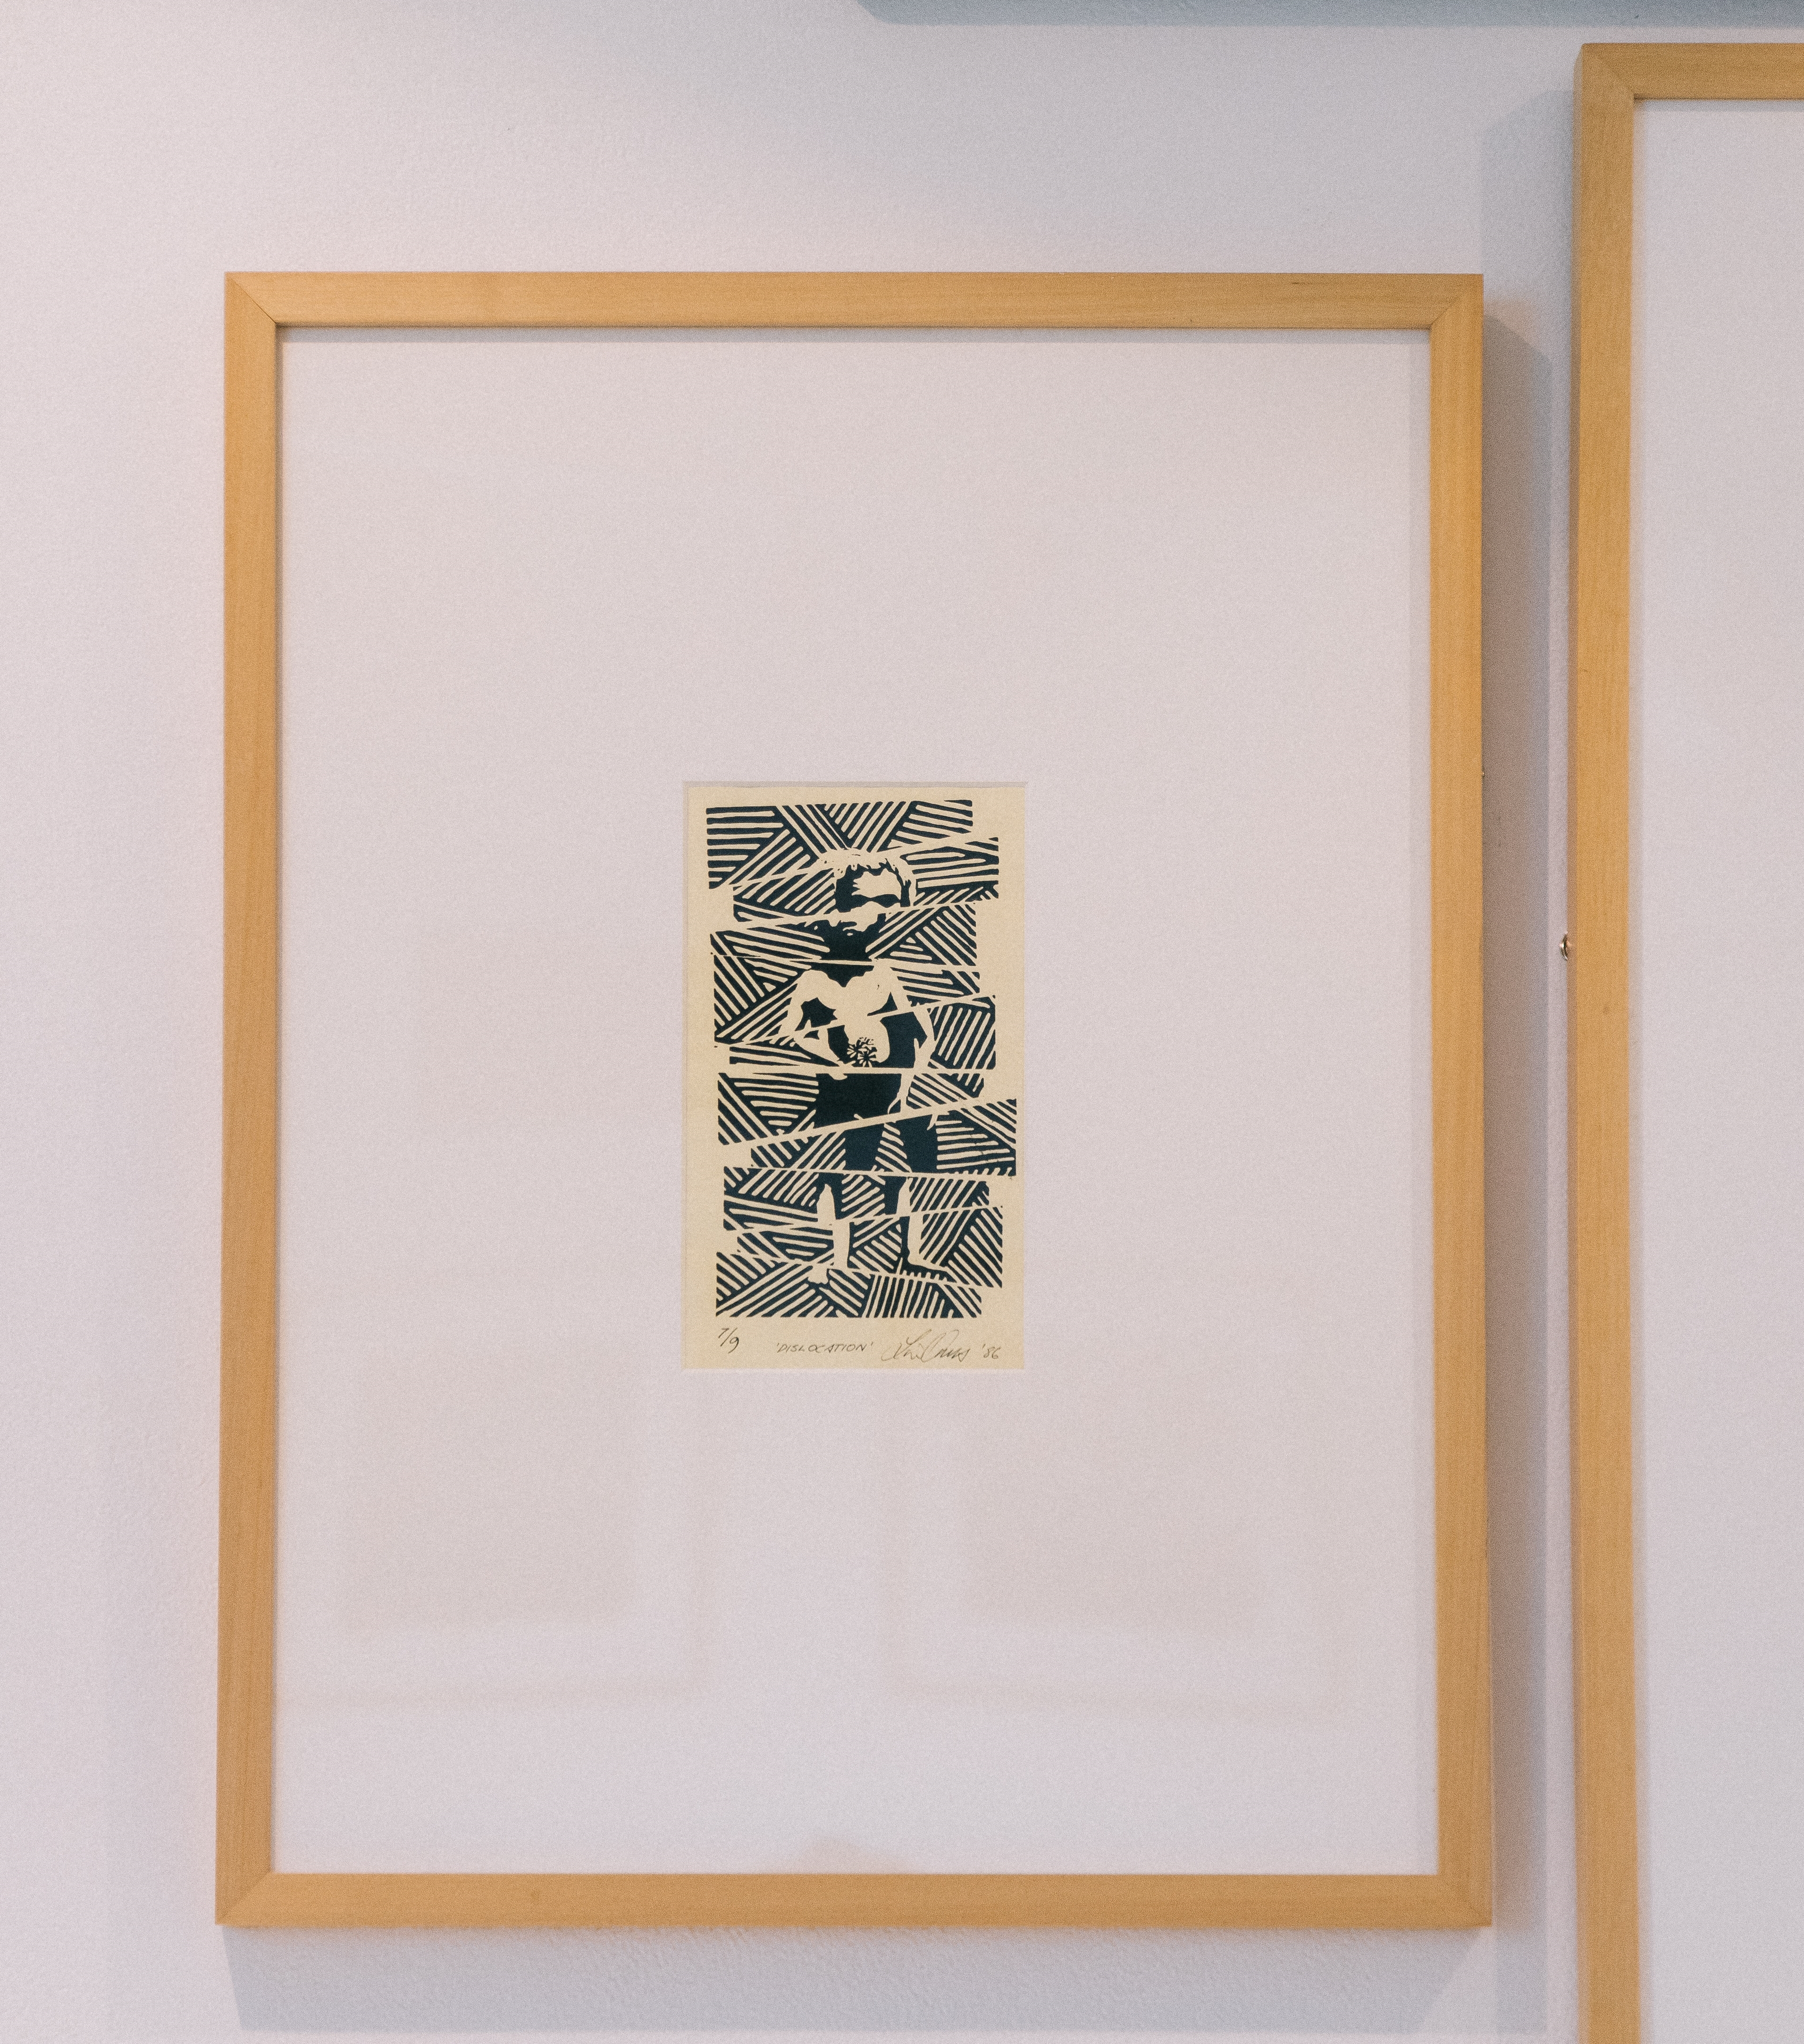 Timber framed linoprint presented with a vertical orientation. The print is black on cream paper and is a spliced image of a young person.